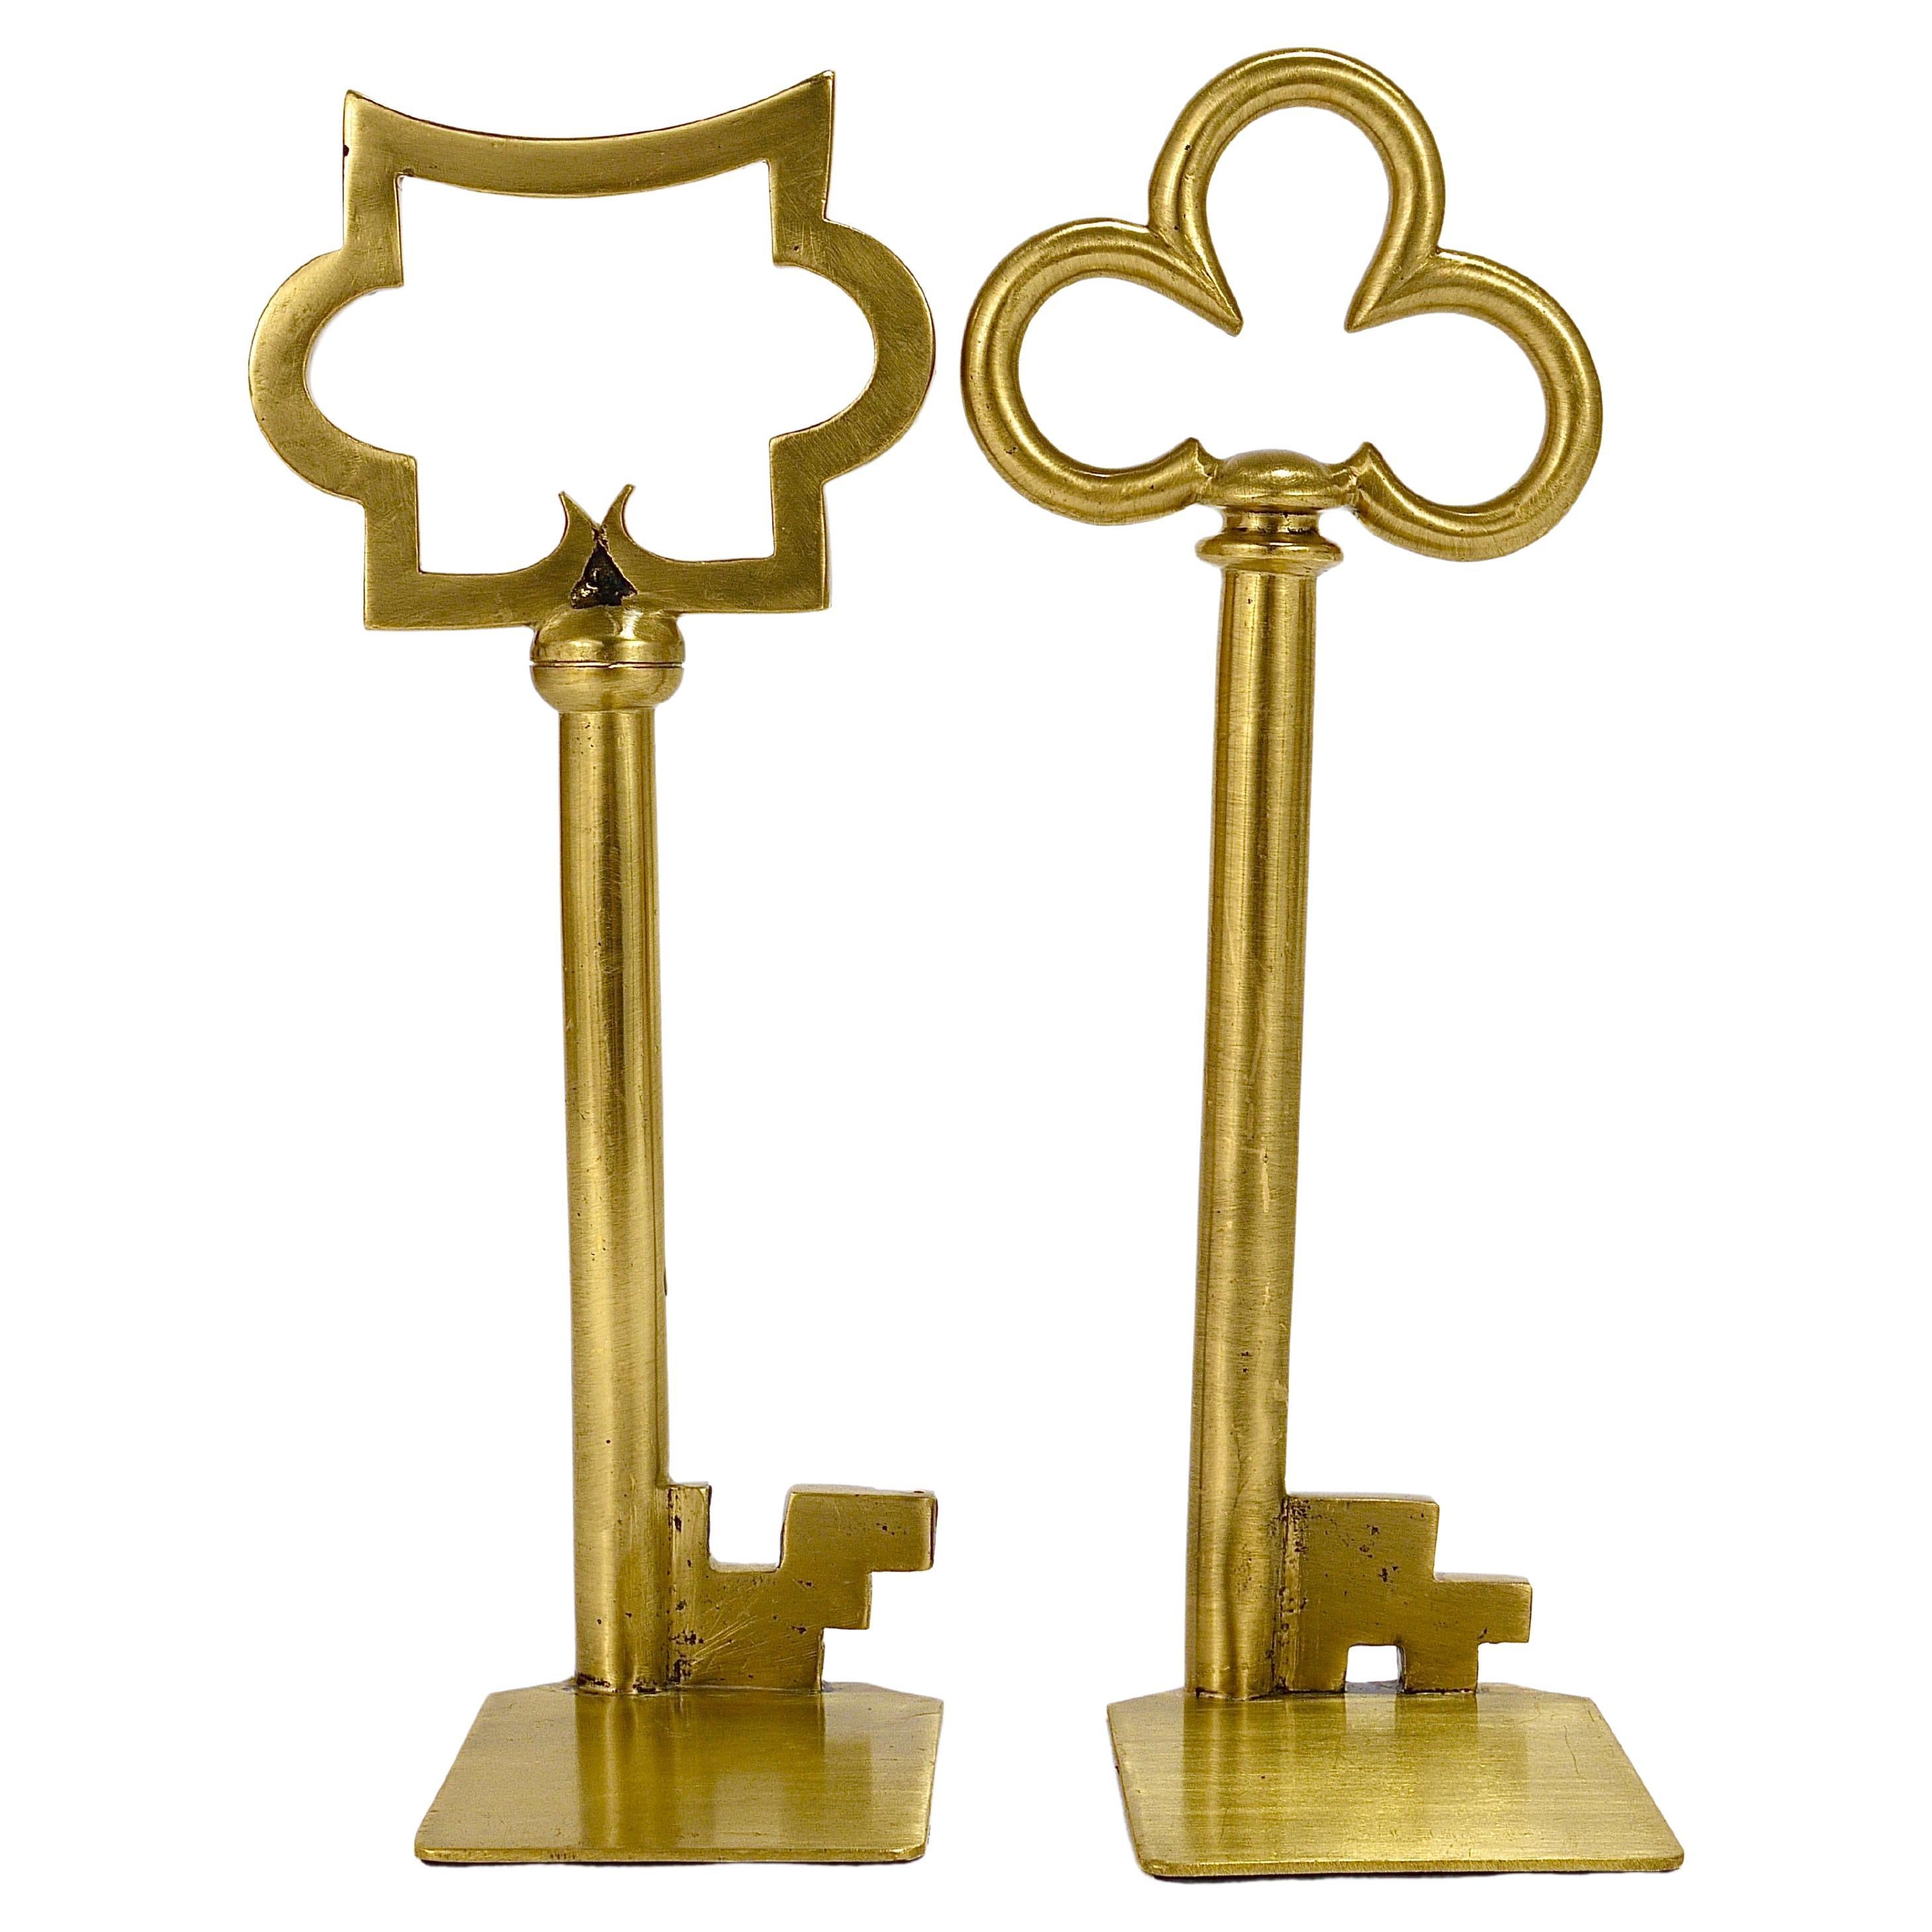 Sculptural Austrian Midcentury Brass Key Book Ends from the, 1950s For Sale